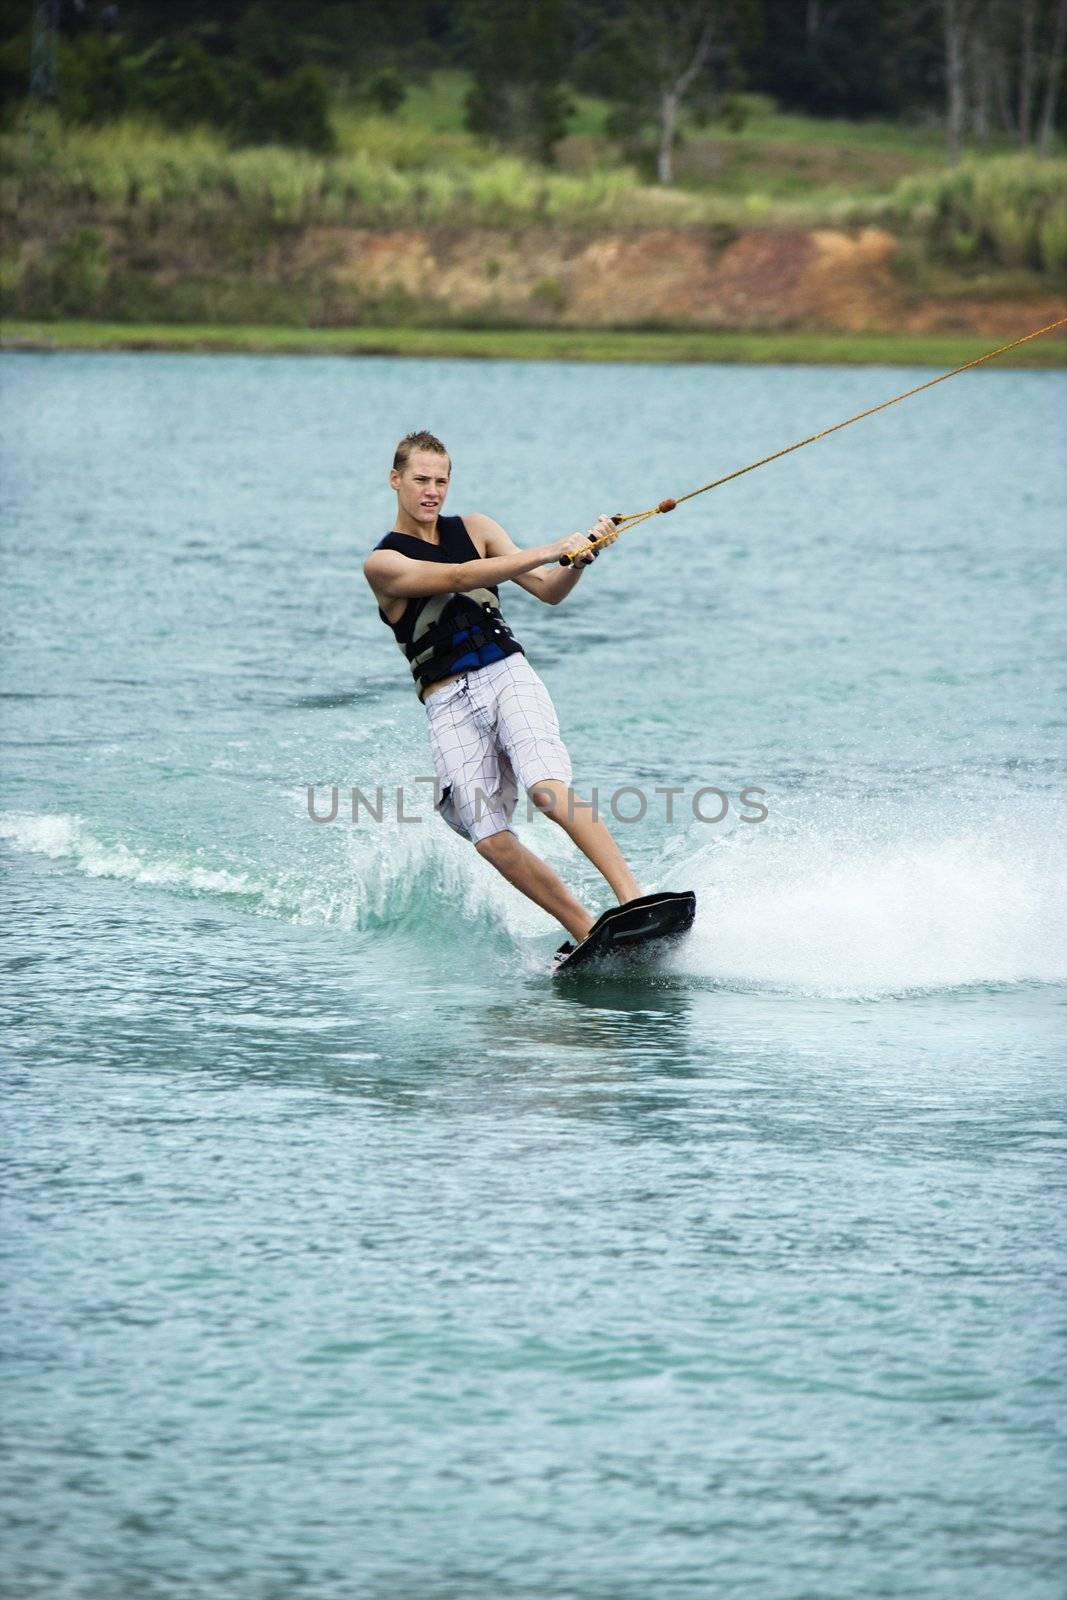 Caucasian young adult male wakeboarding on lake.